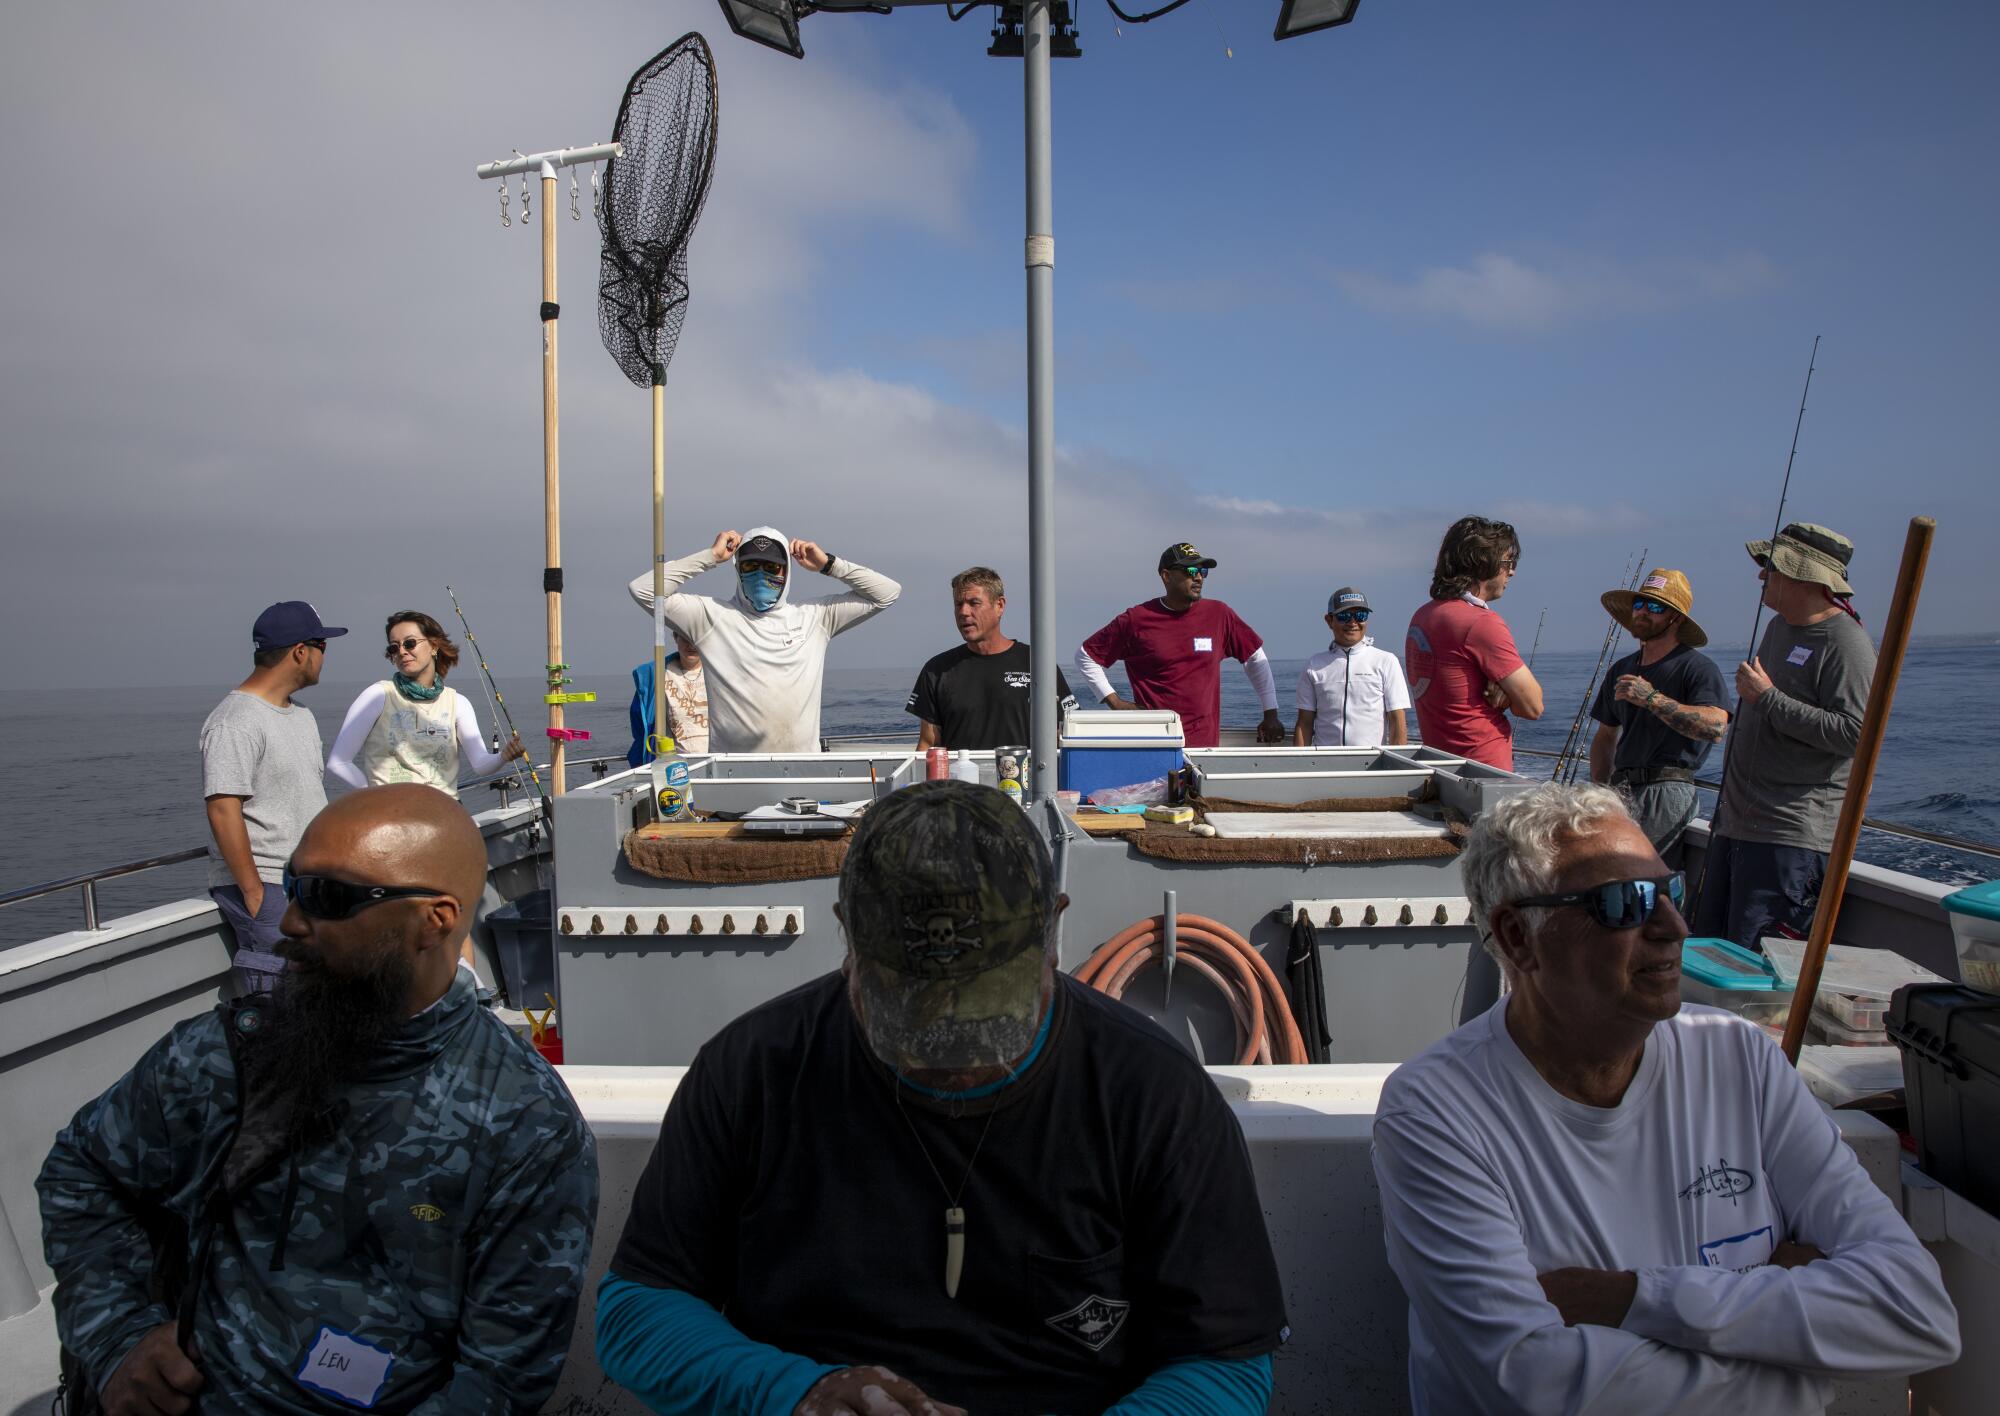 San Diego’s marine protected areas limit fishing to protect sea life. Could boundary changes be coming?